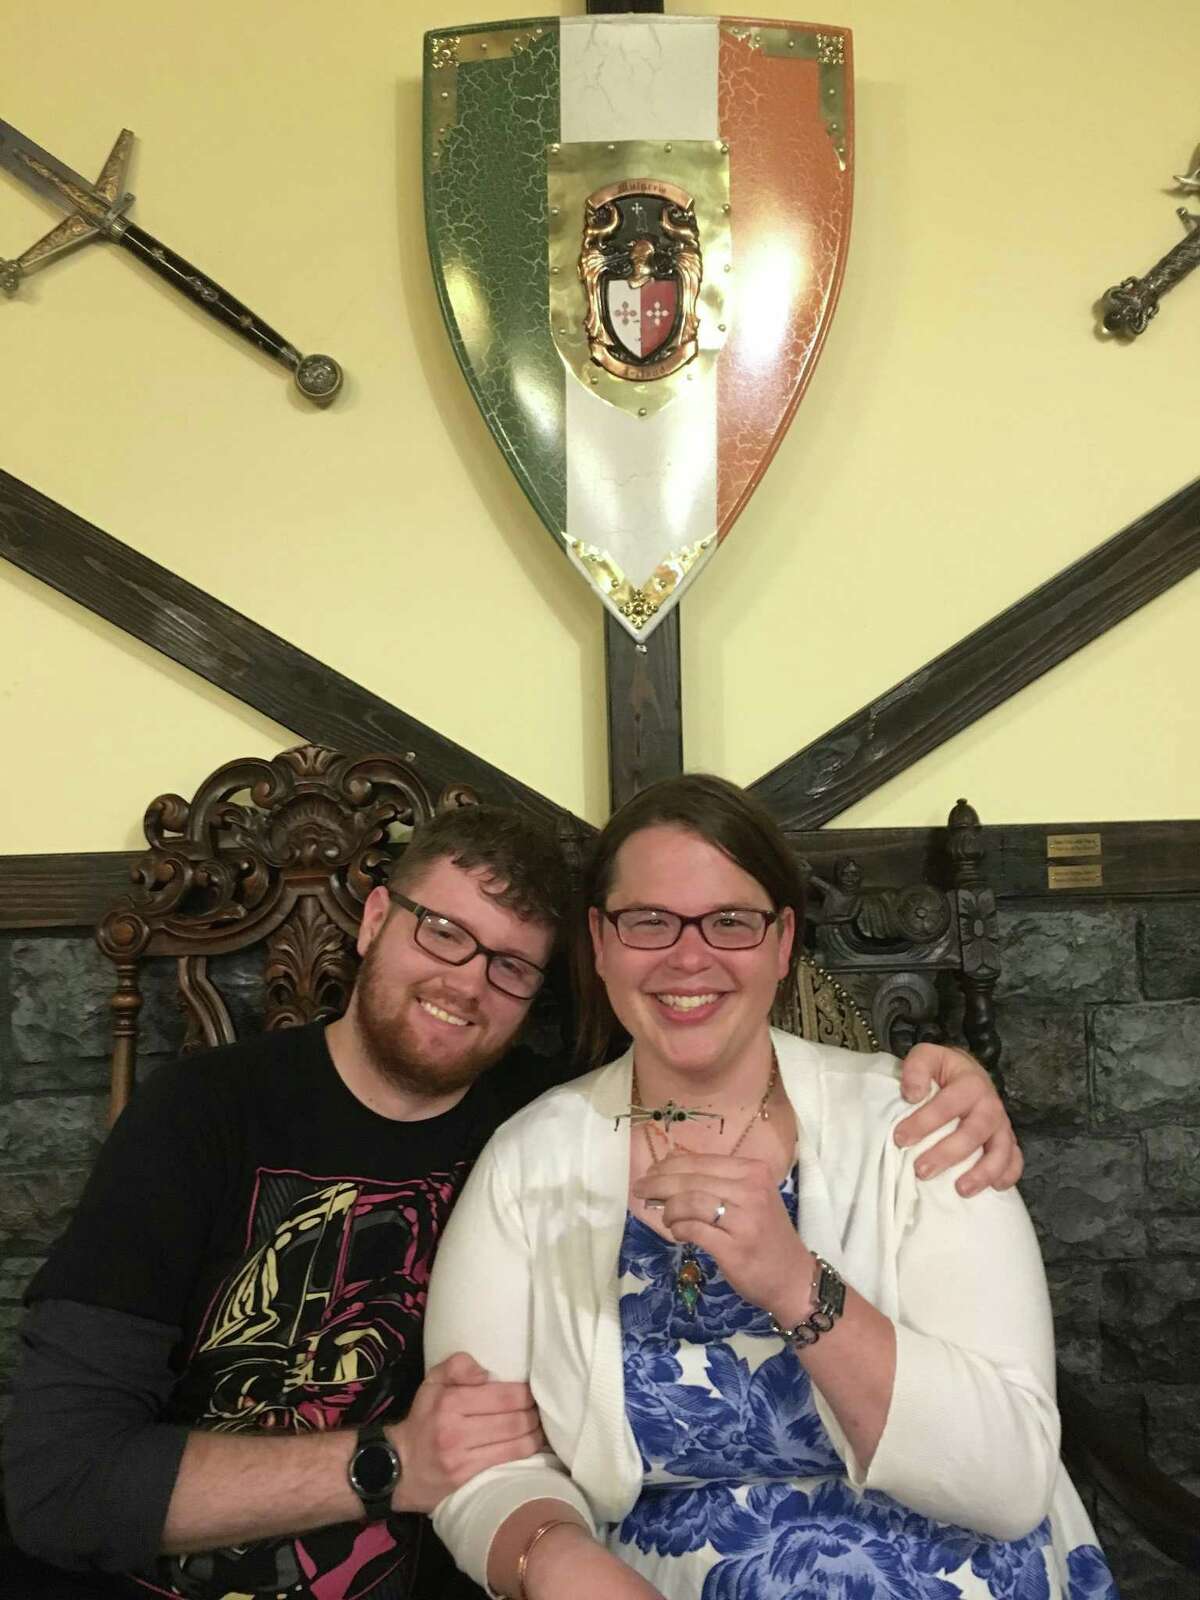 Talk about the romanticism of tabletop gaming. Knight Watch Games regulars Chris Sherrer and Morgan Mooso got engaged Easter Sunday at store. The couple started dating before the shop's grand opening around nine months ago